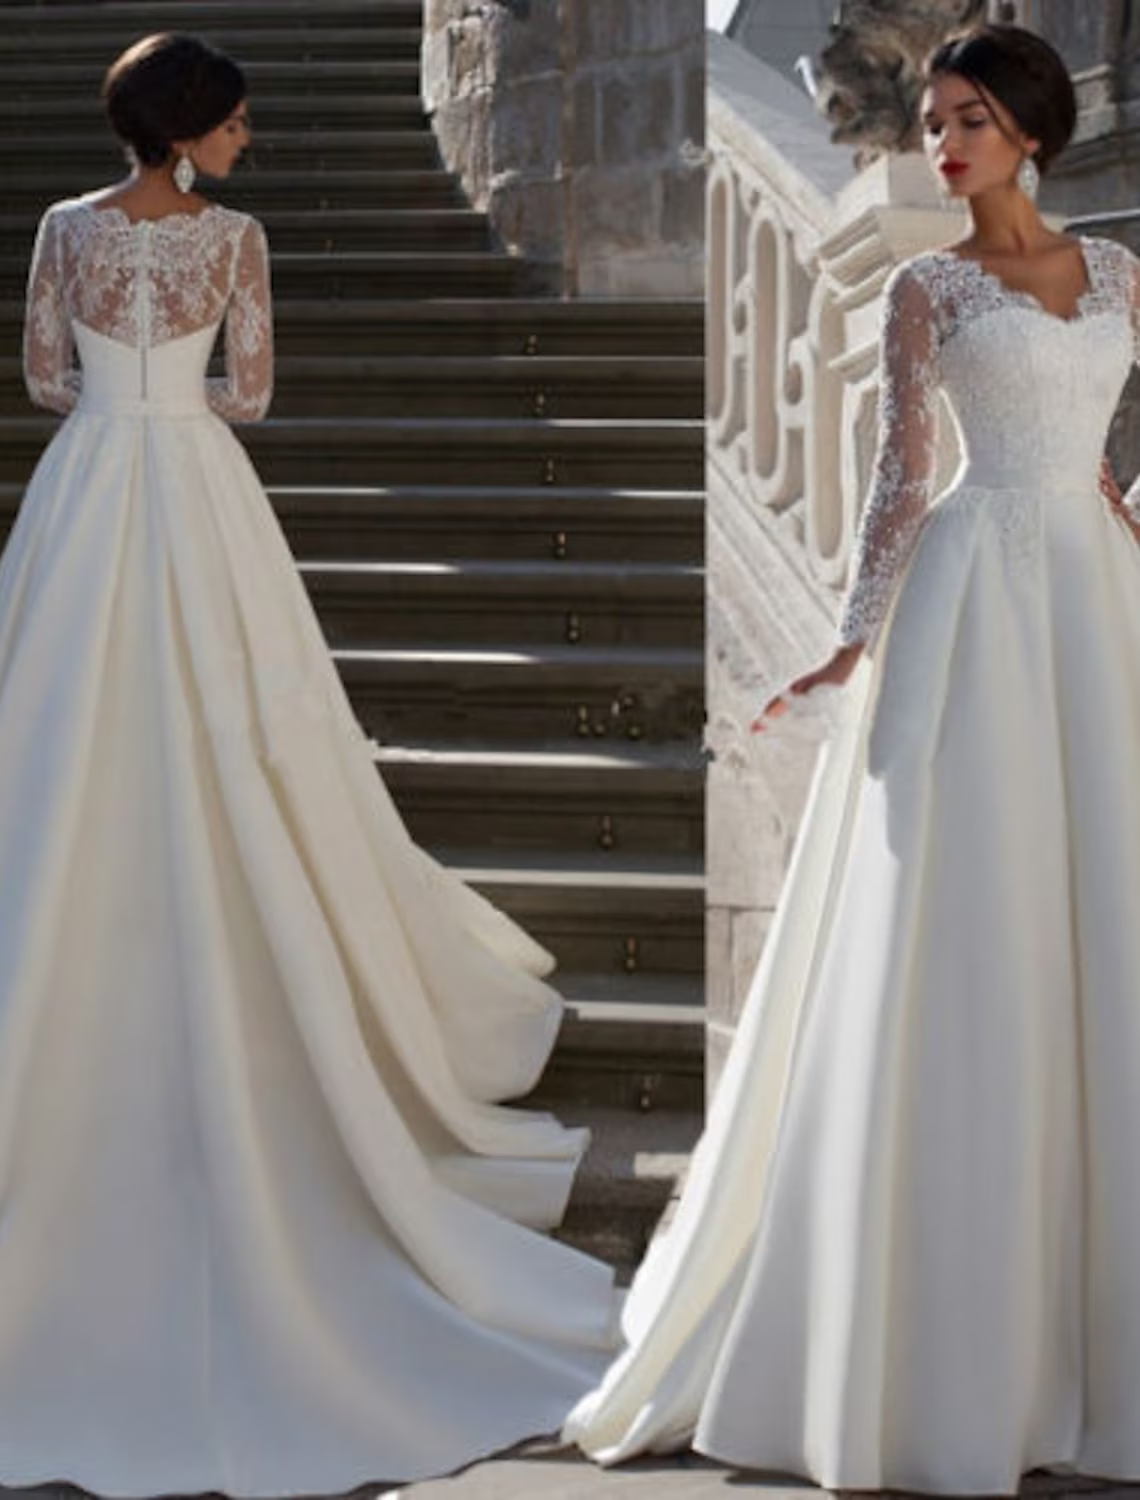 Engagement Formal Wedding Dresses Court Train A-Line Long Sleeve V Neck Satin With Appliques